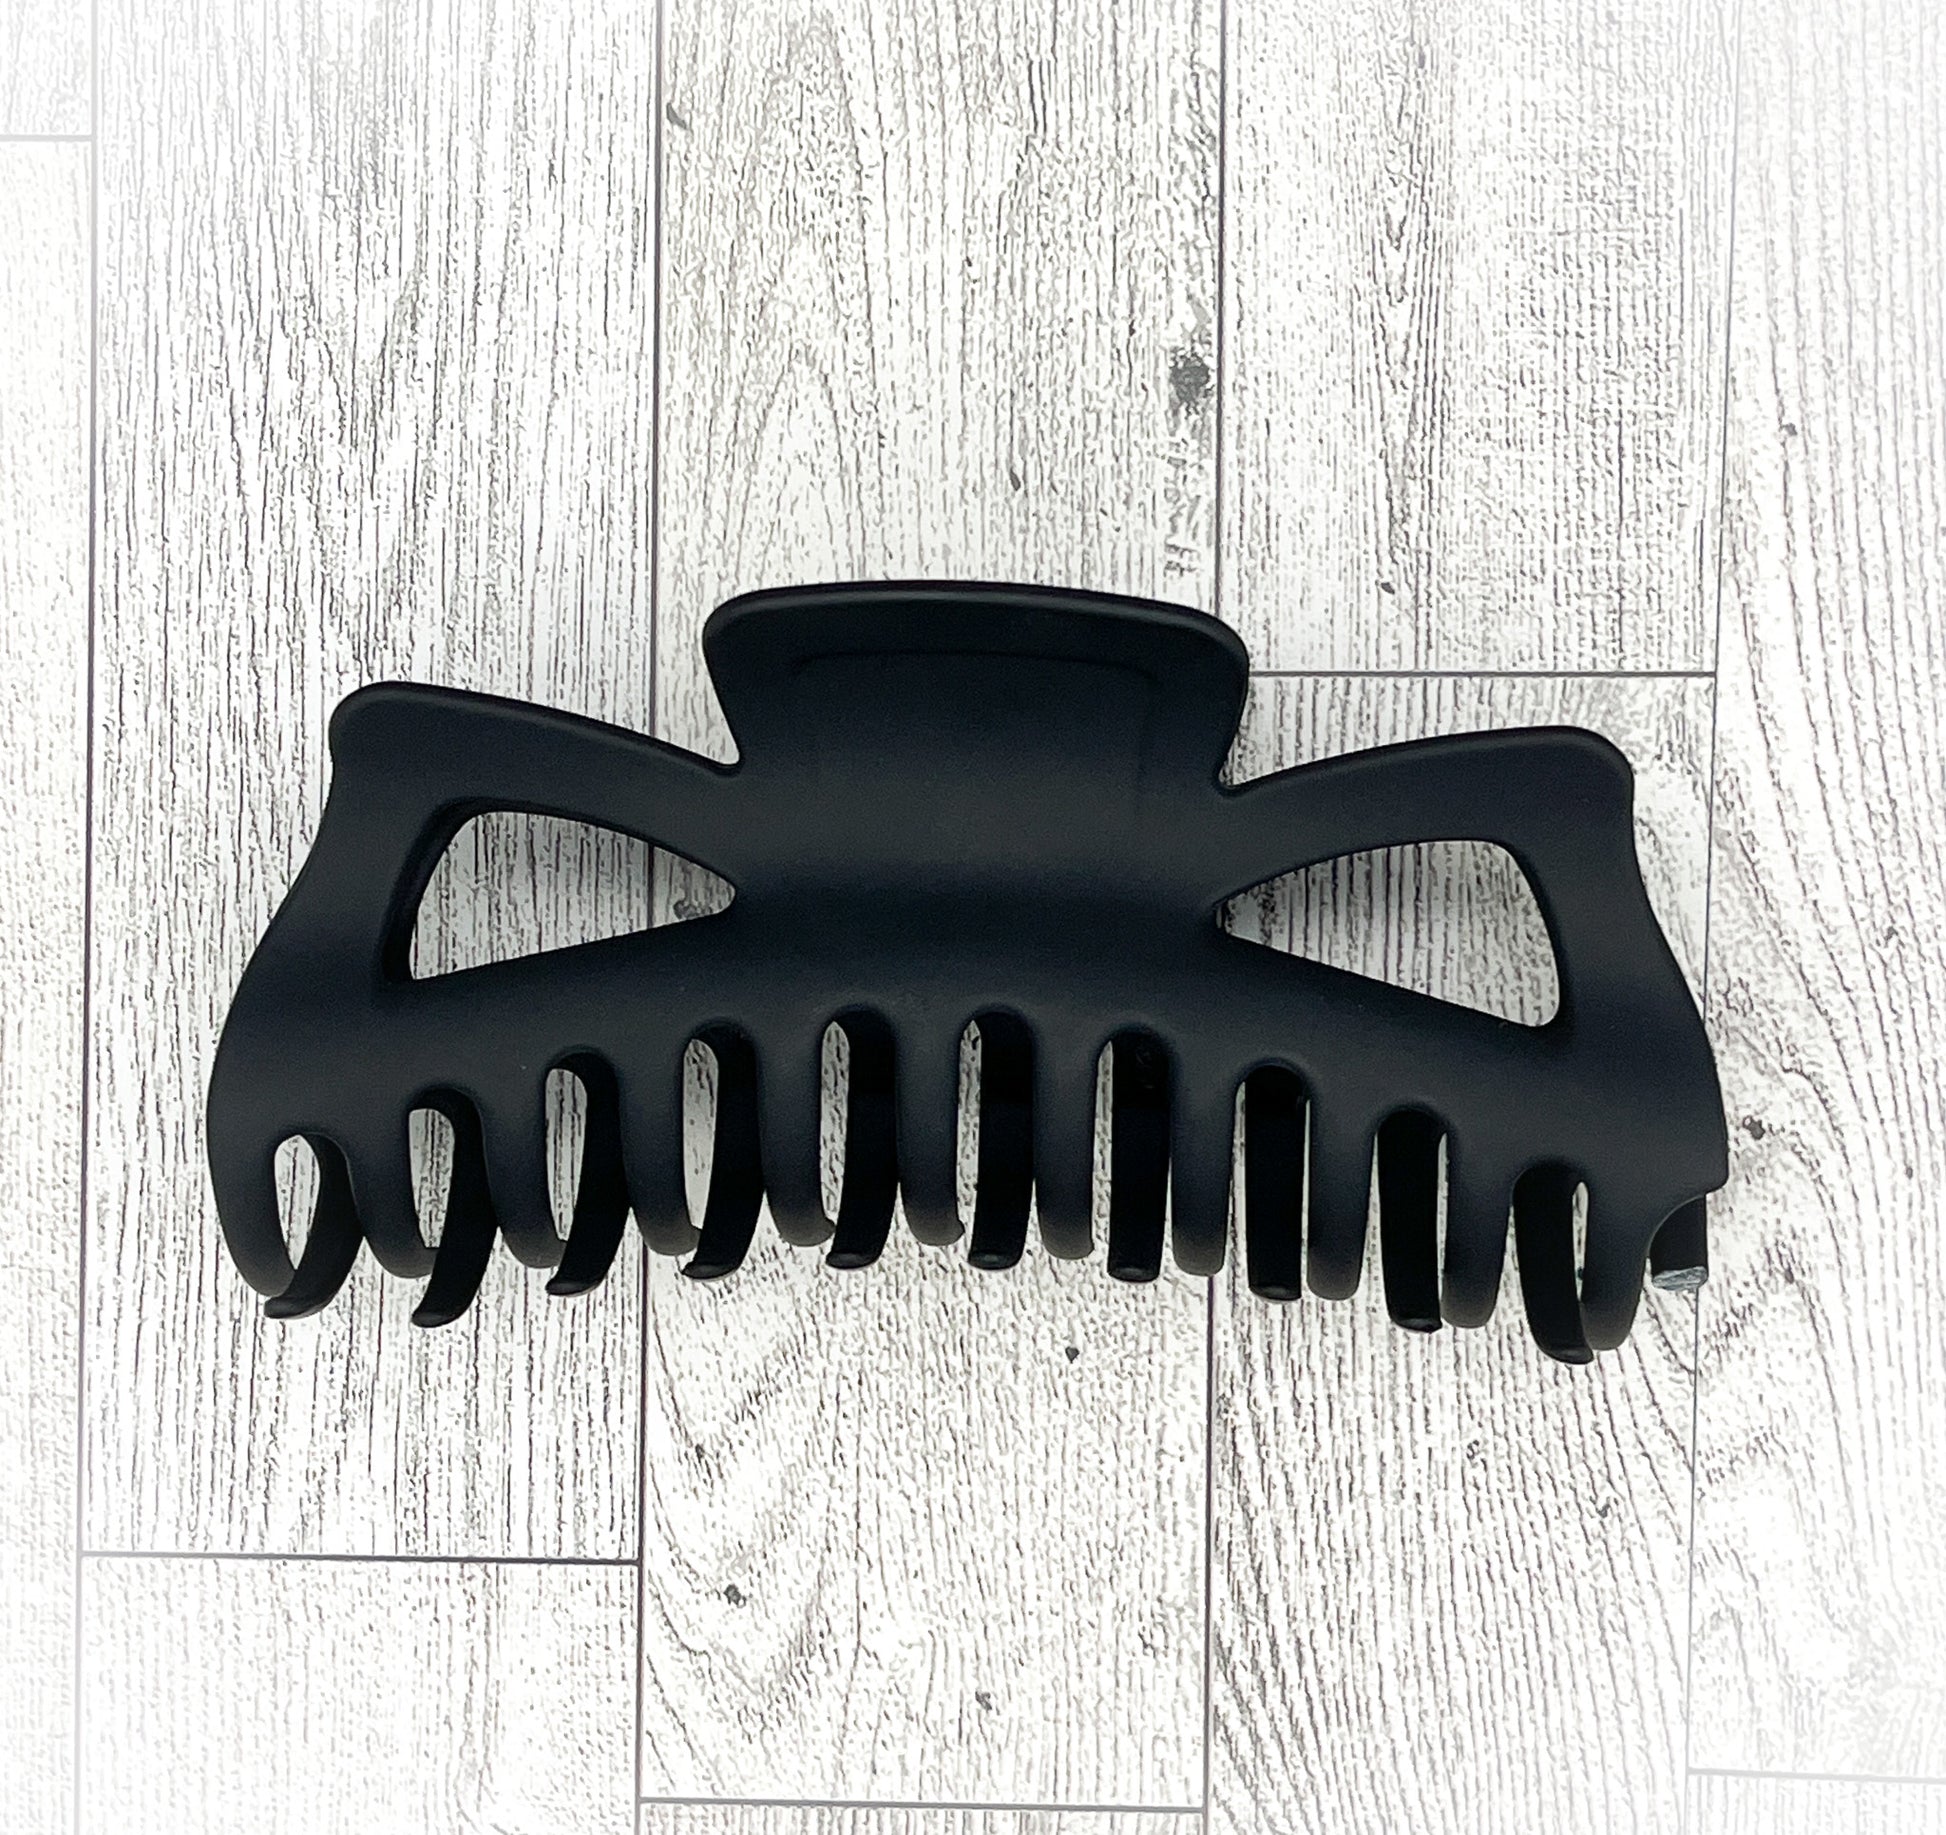 Matte Black Hair Claw Clip - Classic Shape - 5 inches in length. Great for Braids, twists, long hair, thick hair, and coarse hair